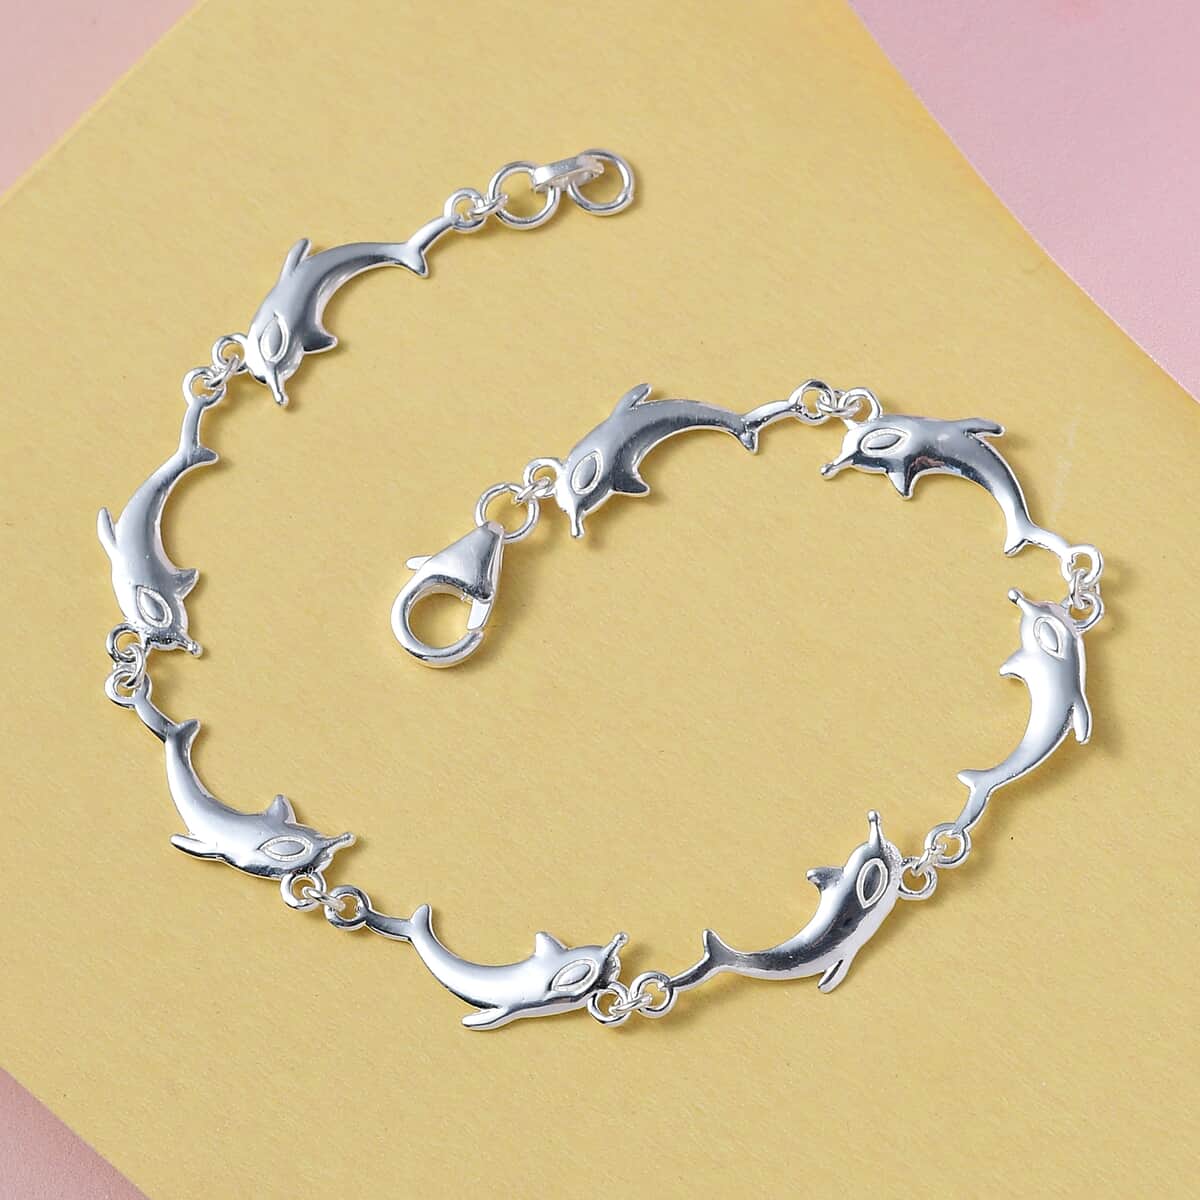 Dolphin Link Charm Bracelet For Women in Sterling Silver, Ocean Jewelry Beach Gifts Size 7.25 Inches (7.25 In) image number 4